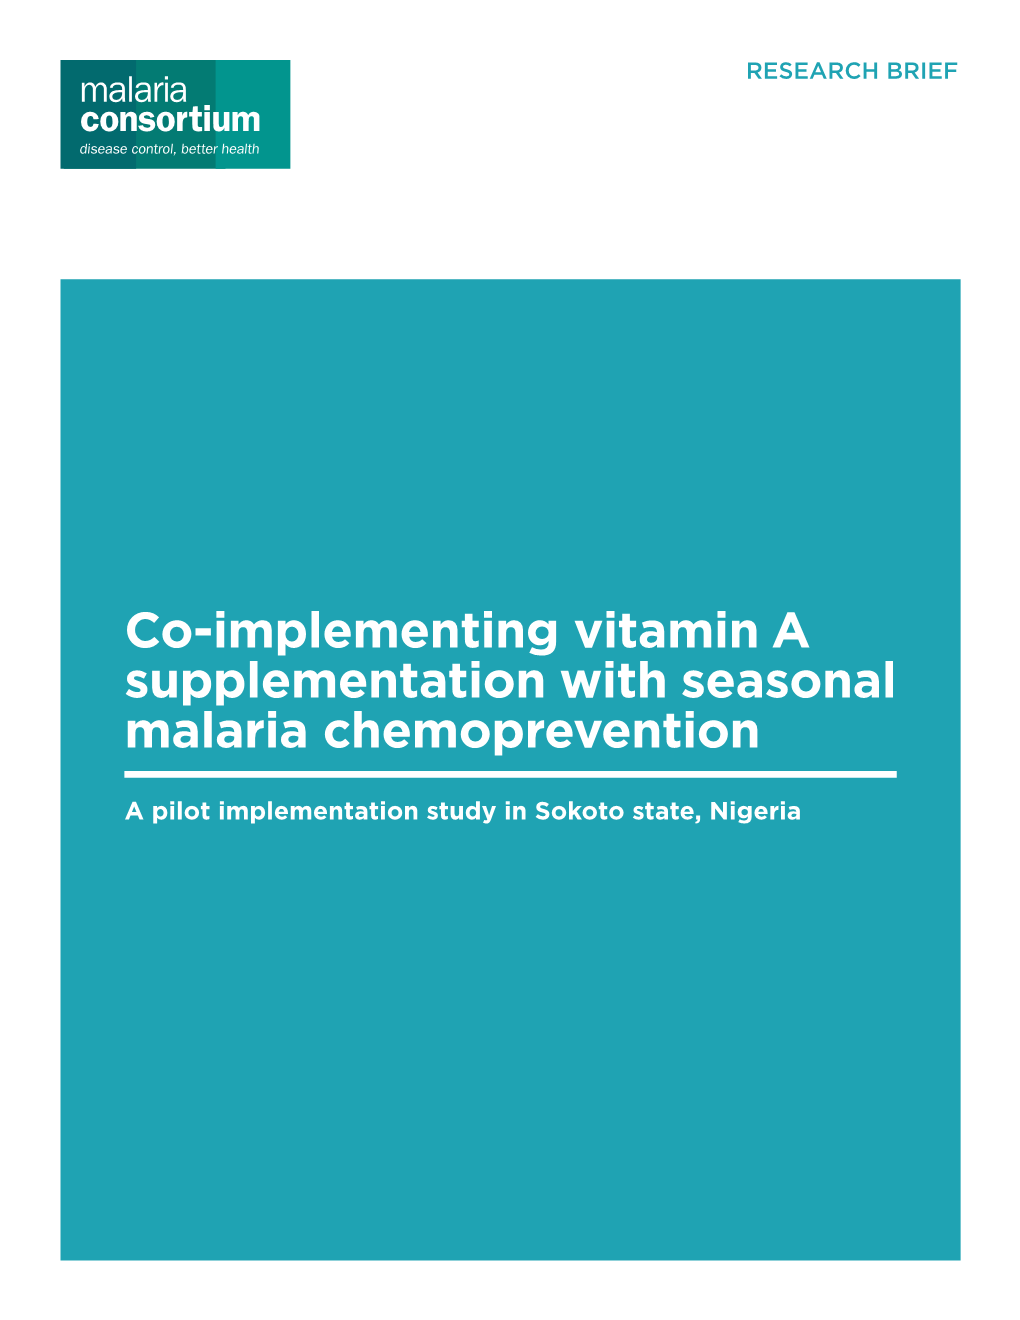 Co-Implementing Vitamin a Supplementation with Seasonal Malaria Chemoprevention